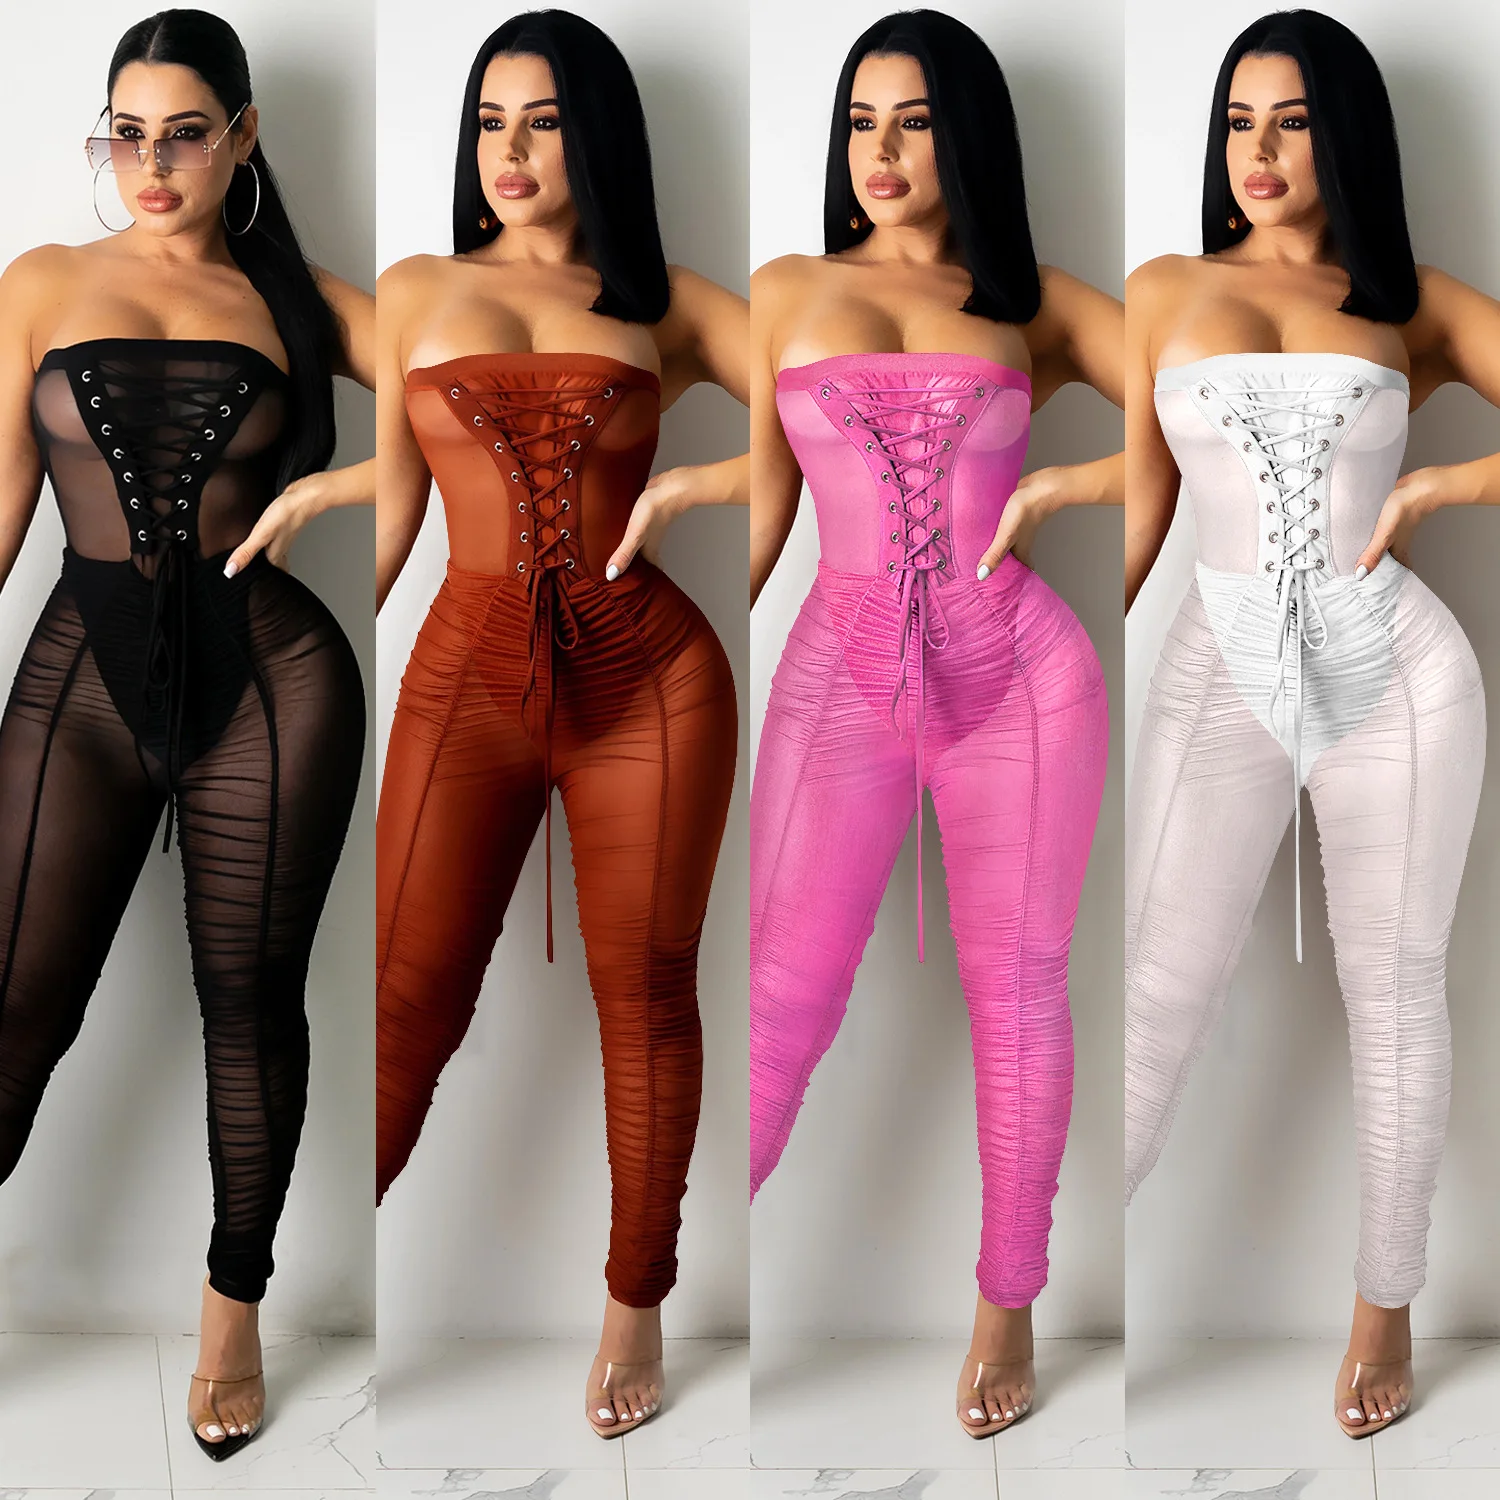 

tube off-shoulder black white mesh bodycon bodysuit jumpsuits, playsuits 2021 summer trendy sexy sheer corset jumpsuit women, White/black/red/rose red corset jumpsuit sexy